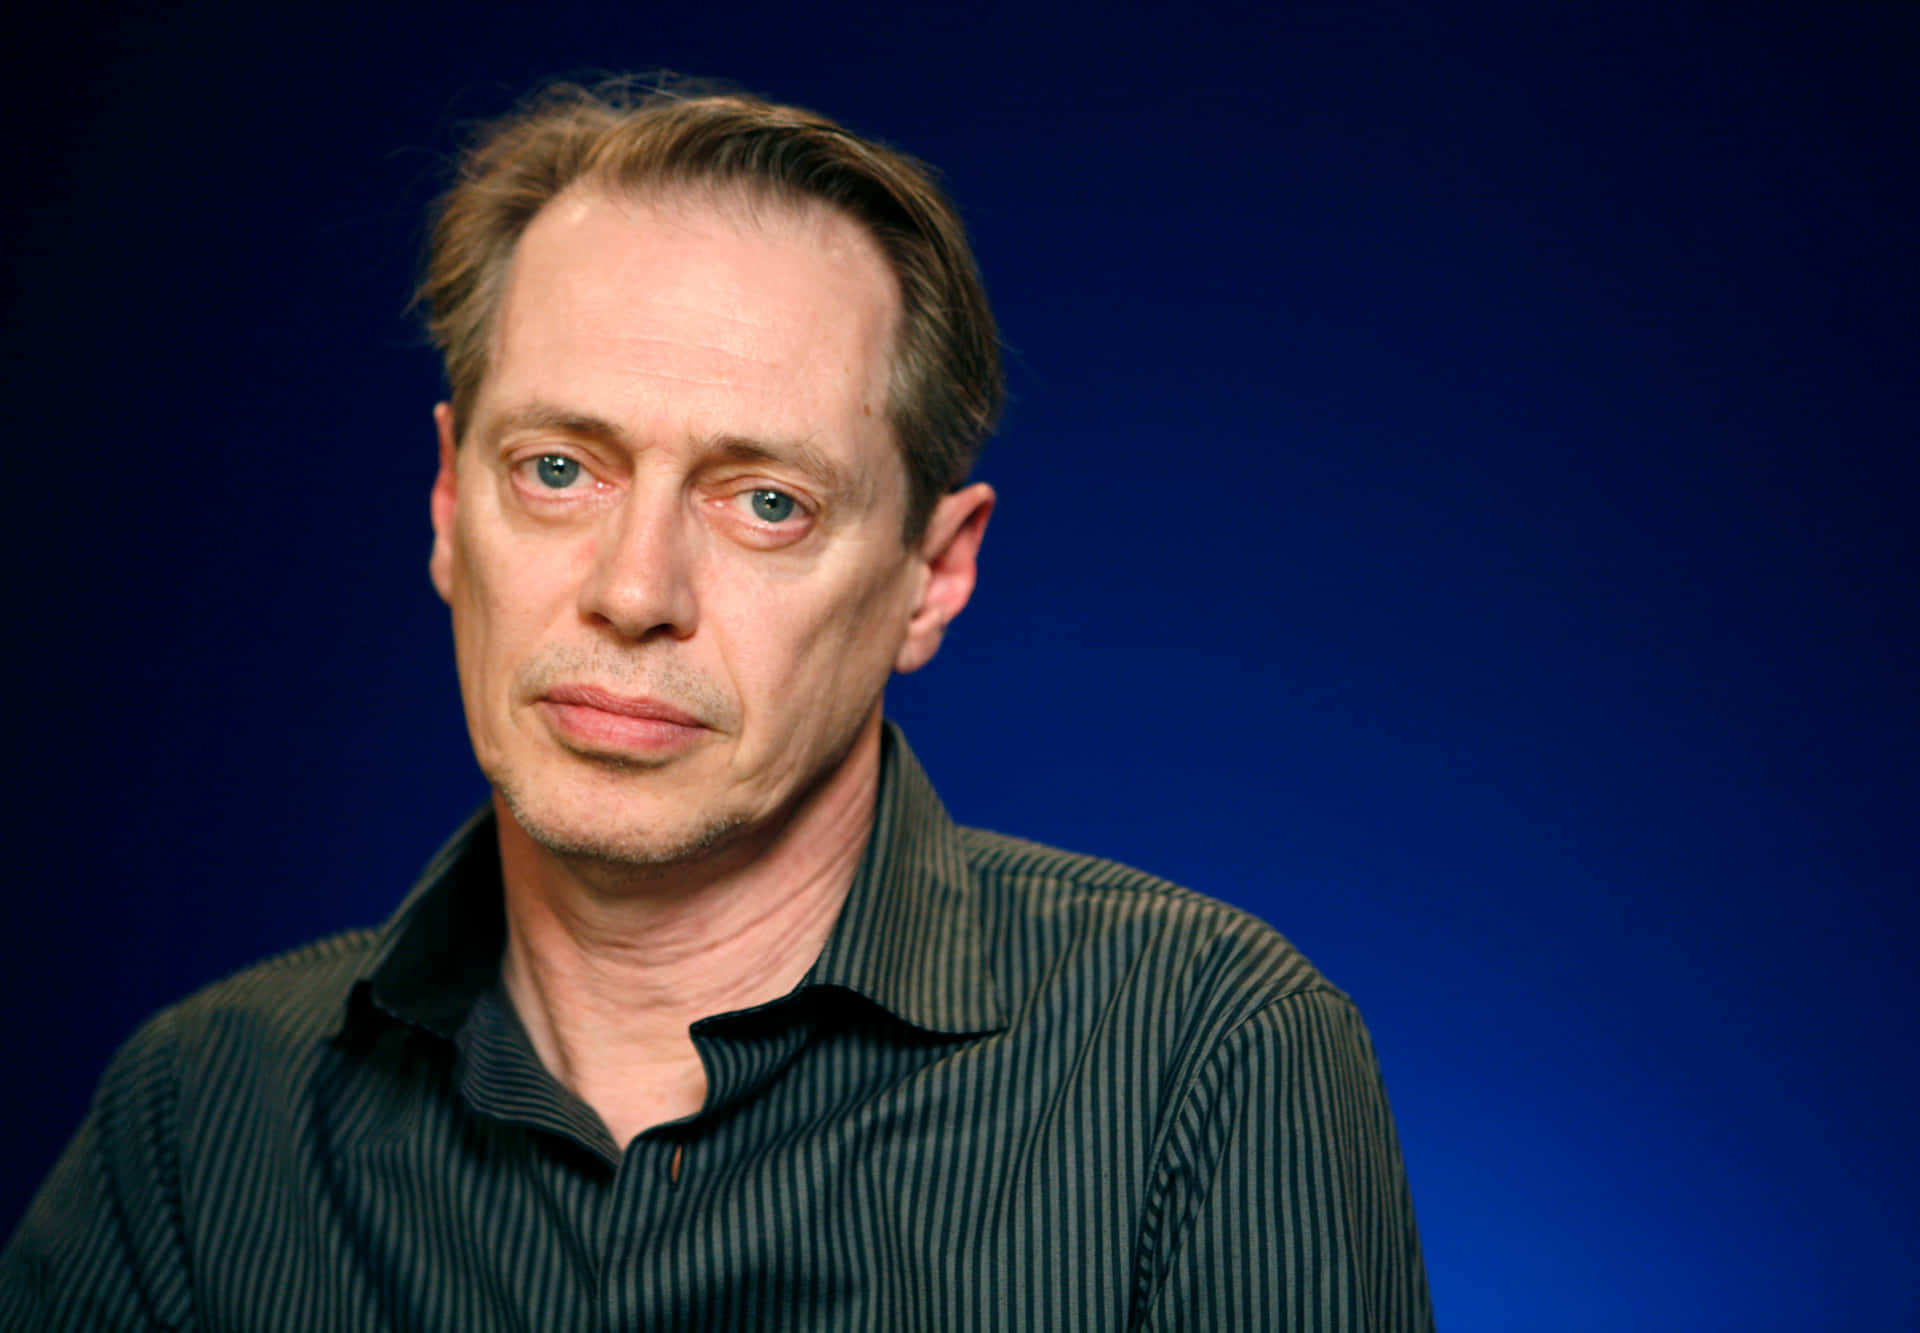 Steve Buscemi In American Filmmaker Guy Ritchie's 1999 Crime Caper 'lock, Stock And Two Smoking Barrels' Background